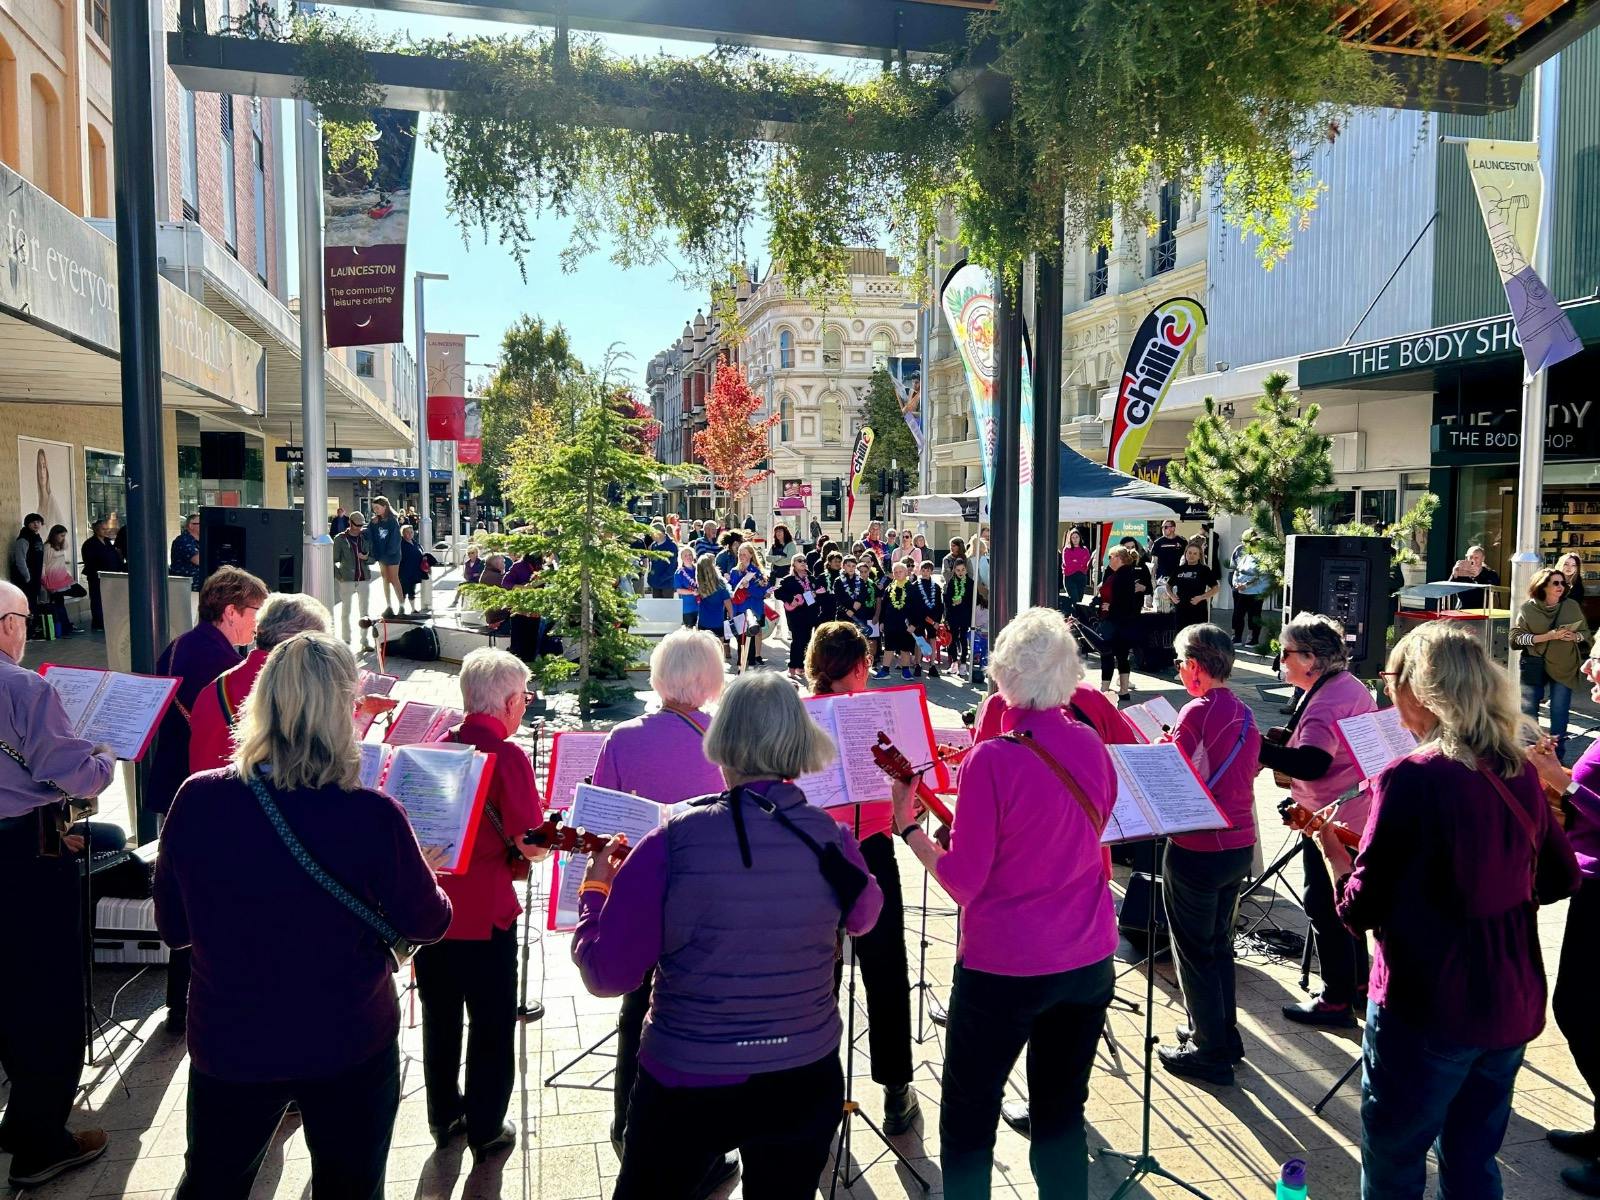 Community group from Hobart dressed in pink performing in Brisbane St Mall to  Saturday shoppers.